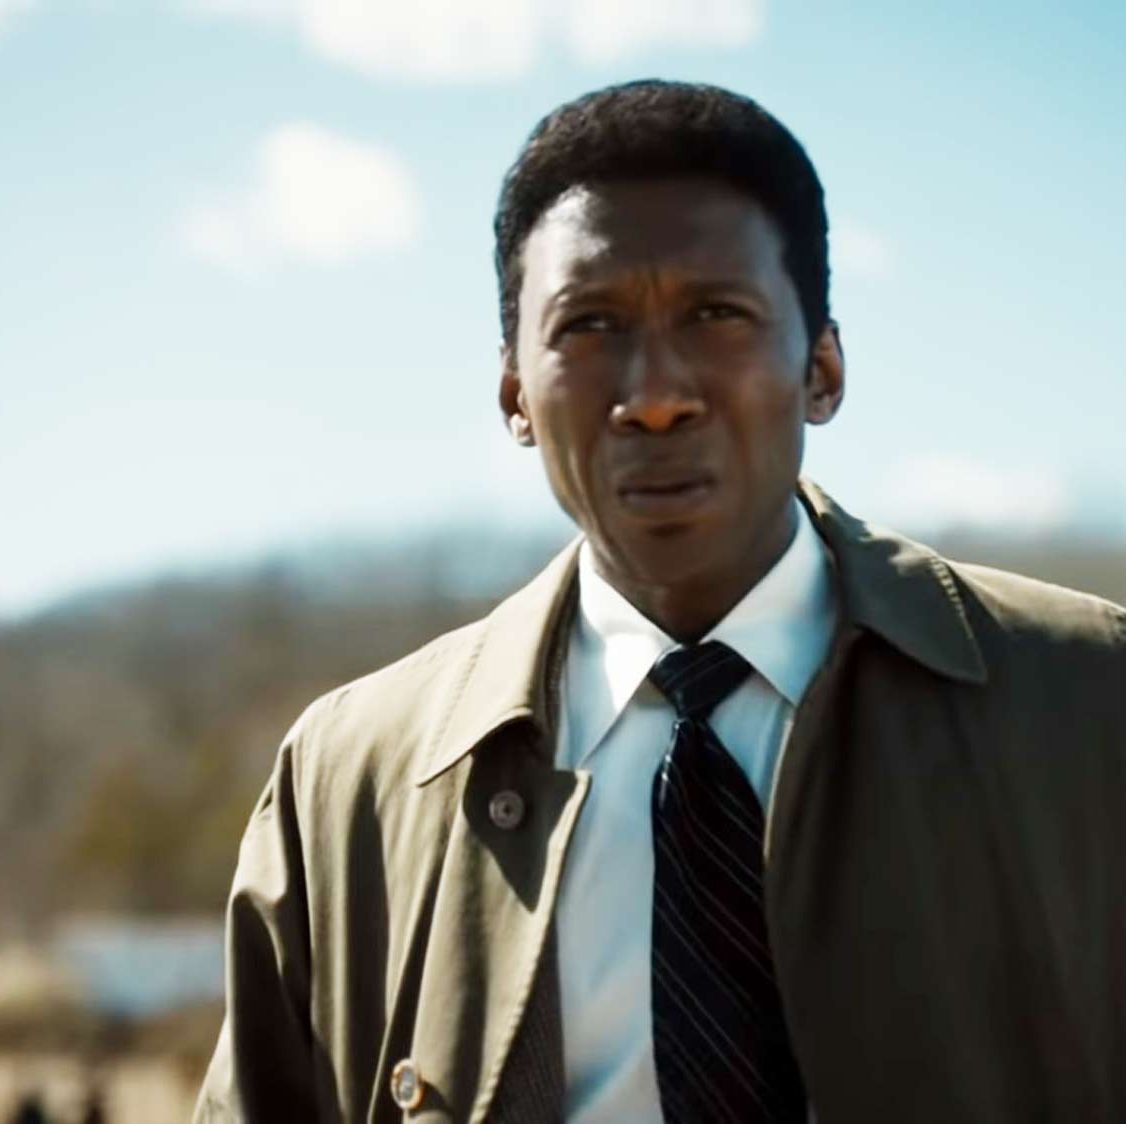 True Detective season 4 is NOT in the works, reveals HBO boss